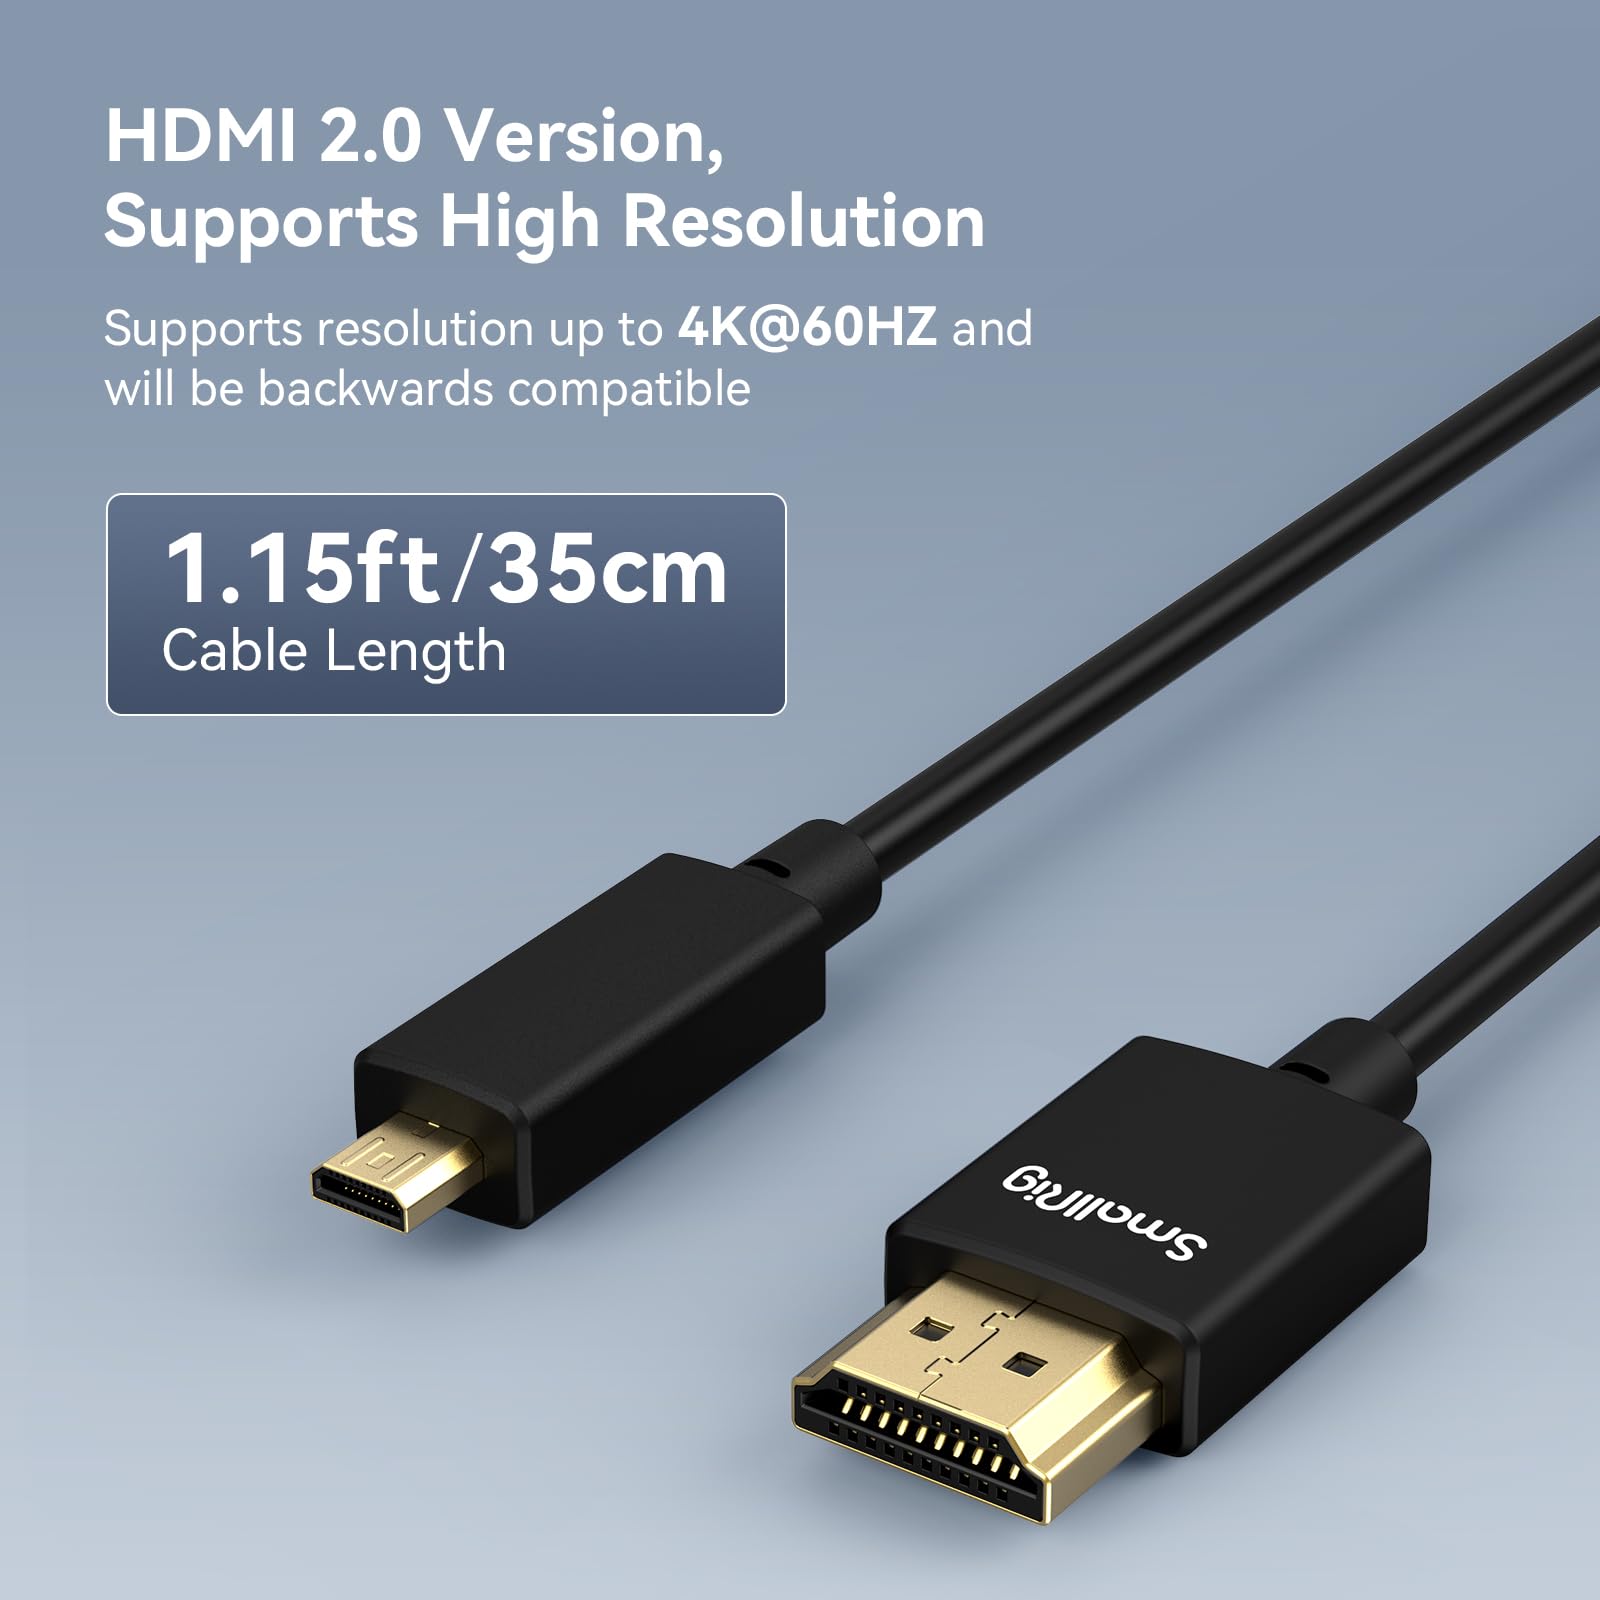 SMALLRIG Micro Ultra Thin HDMI Cable 35cm/1.15Ft (D to A), Super Flexible Slim High Speed 4K 60Hz HDR 2.0, Fit for Sony A7RIII / A6600 / A6500, for FUJIFILM X-T3 / X-T4, for GoPro Hero 7/6/5-3042B